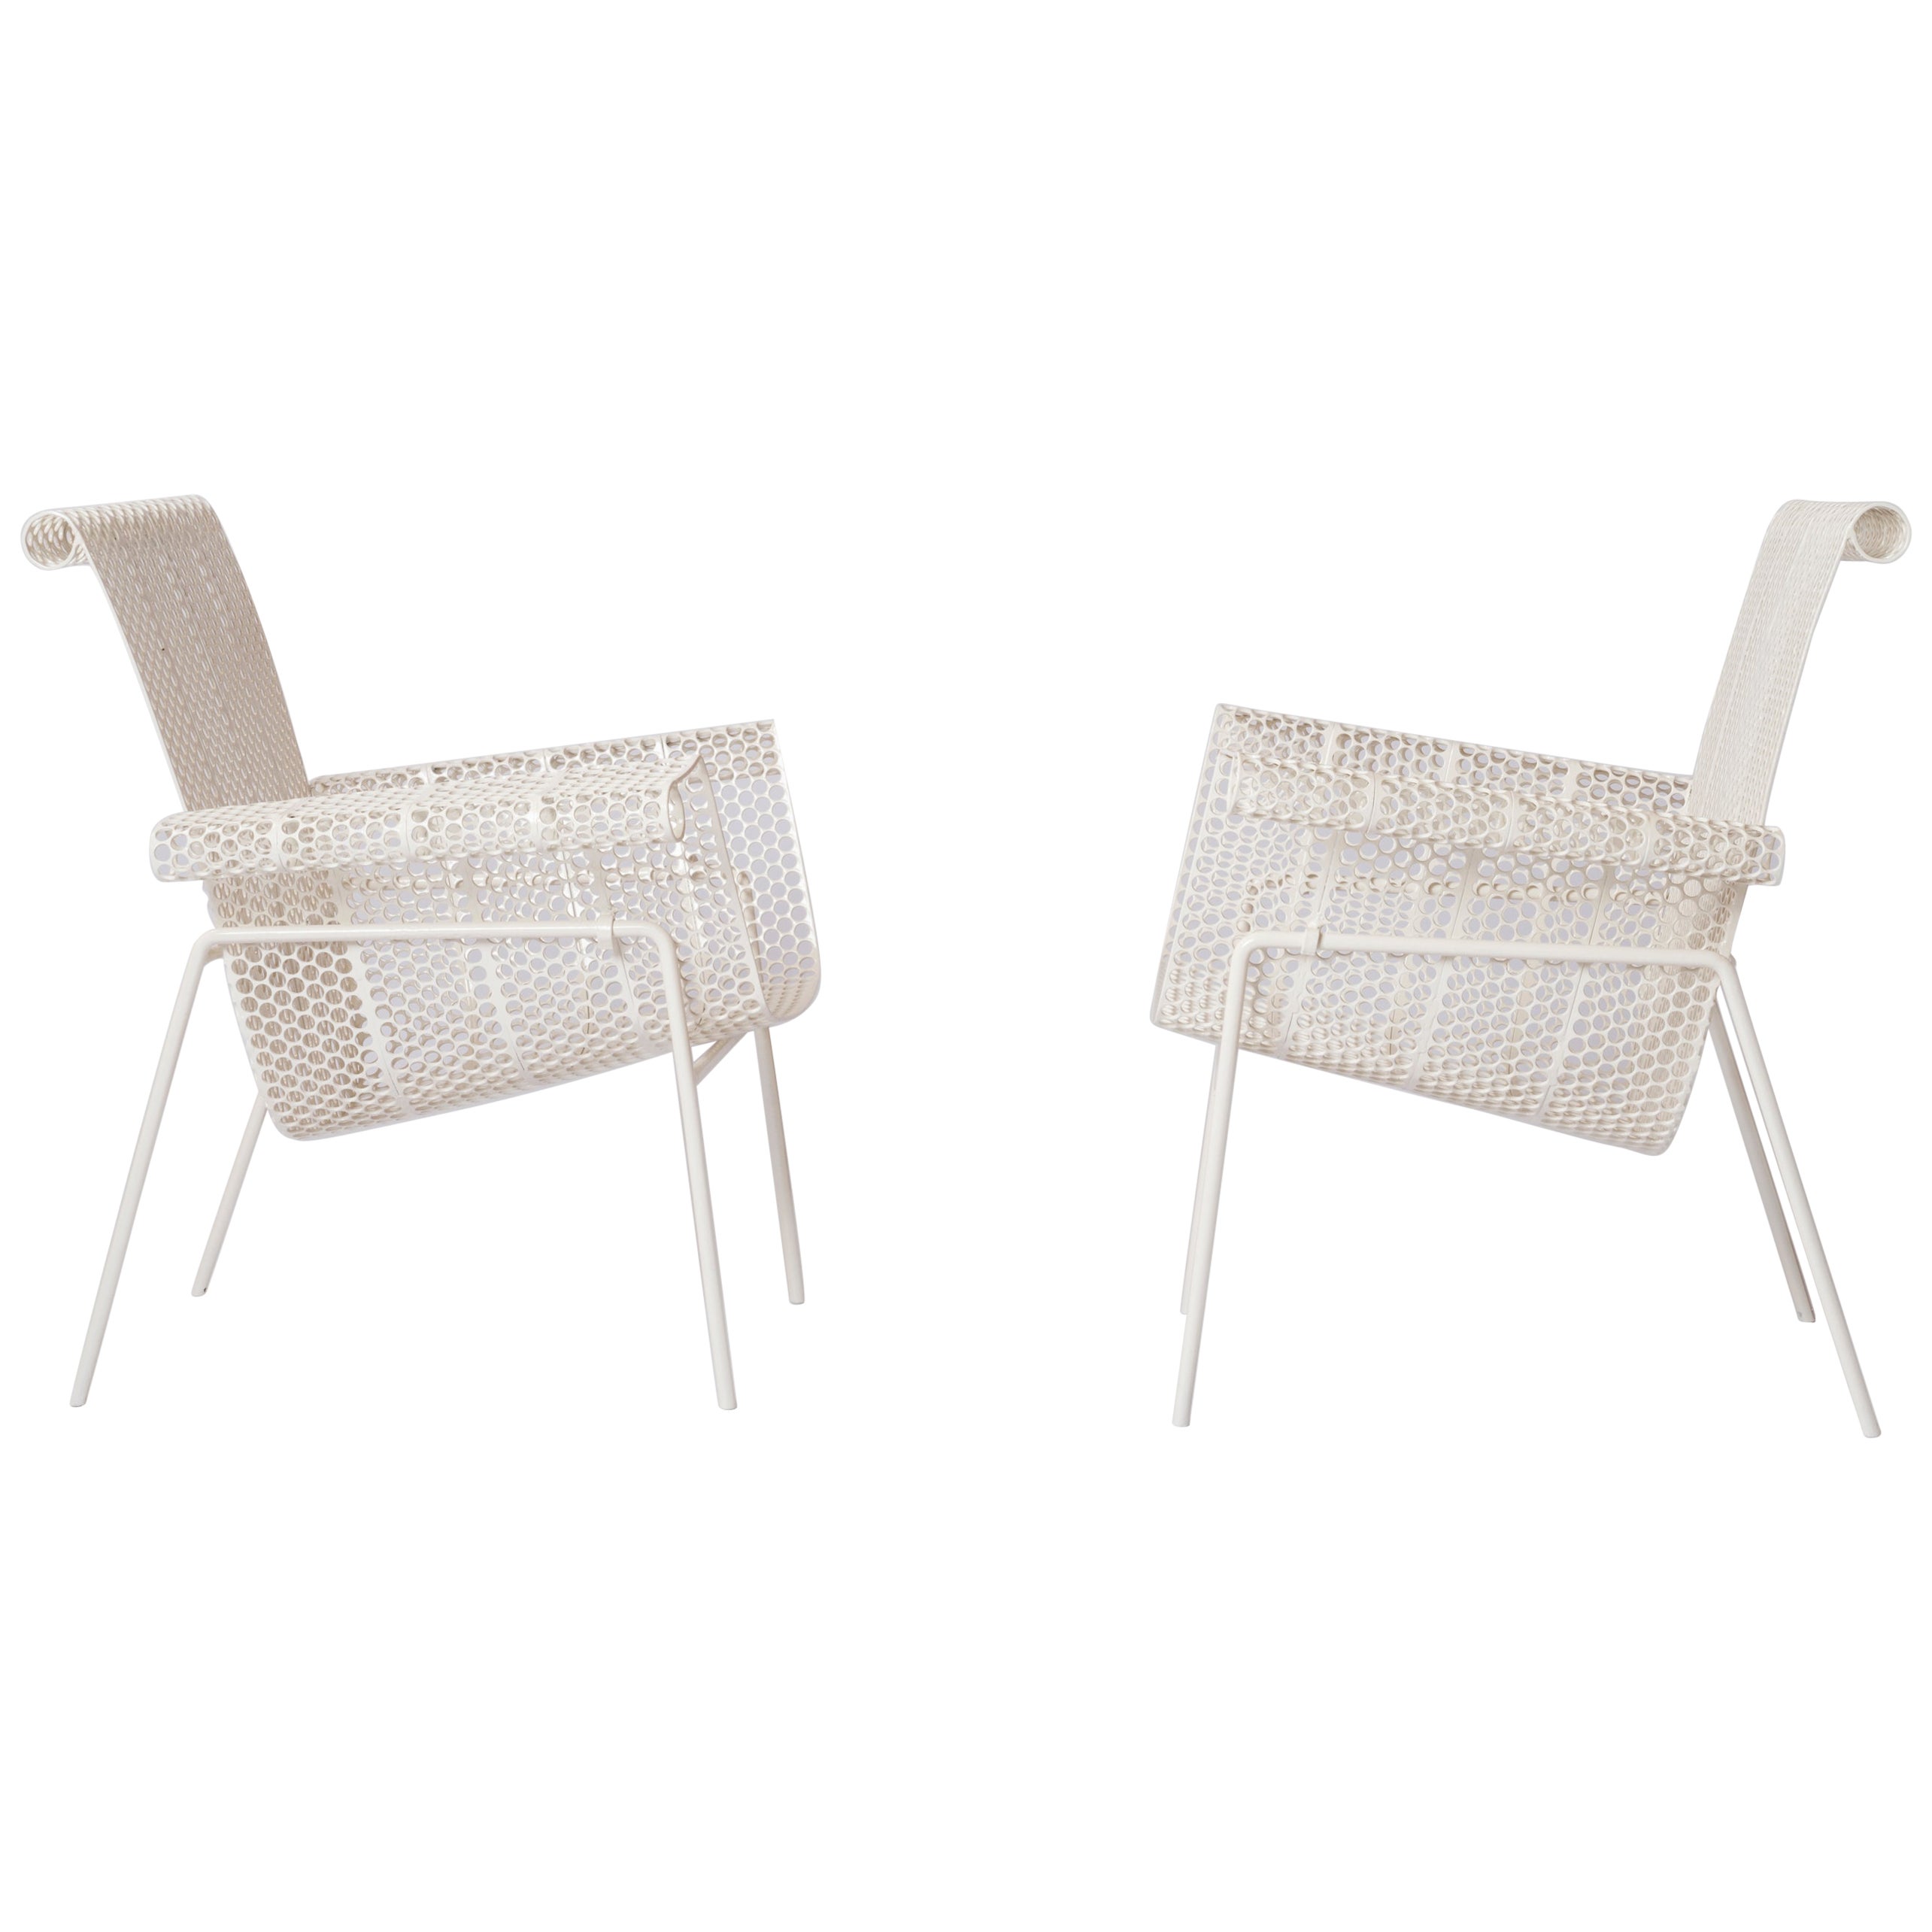 "Rigitulle" Ply Perforated Sheet Metal Armchairs by René Malaval - France 1950s For Sale